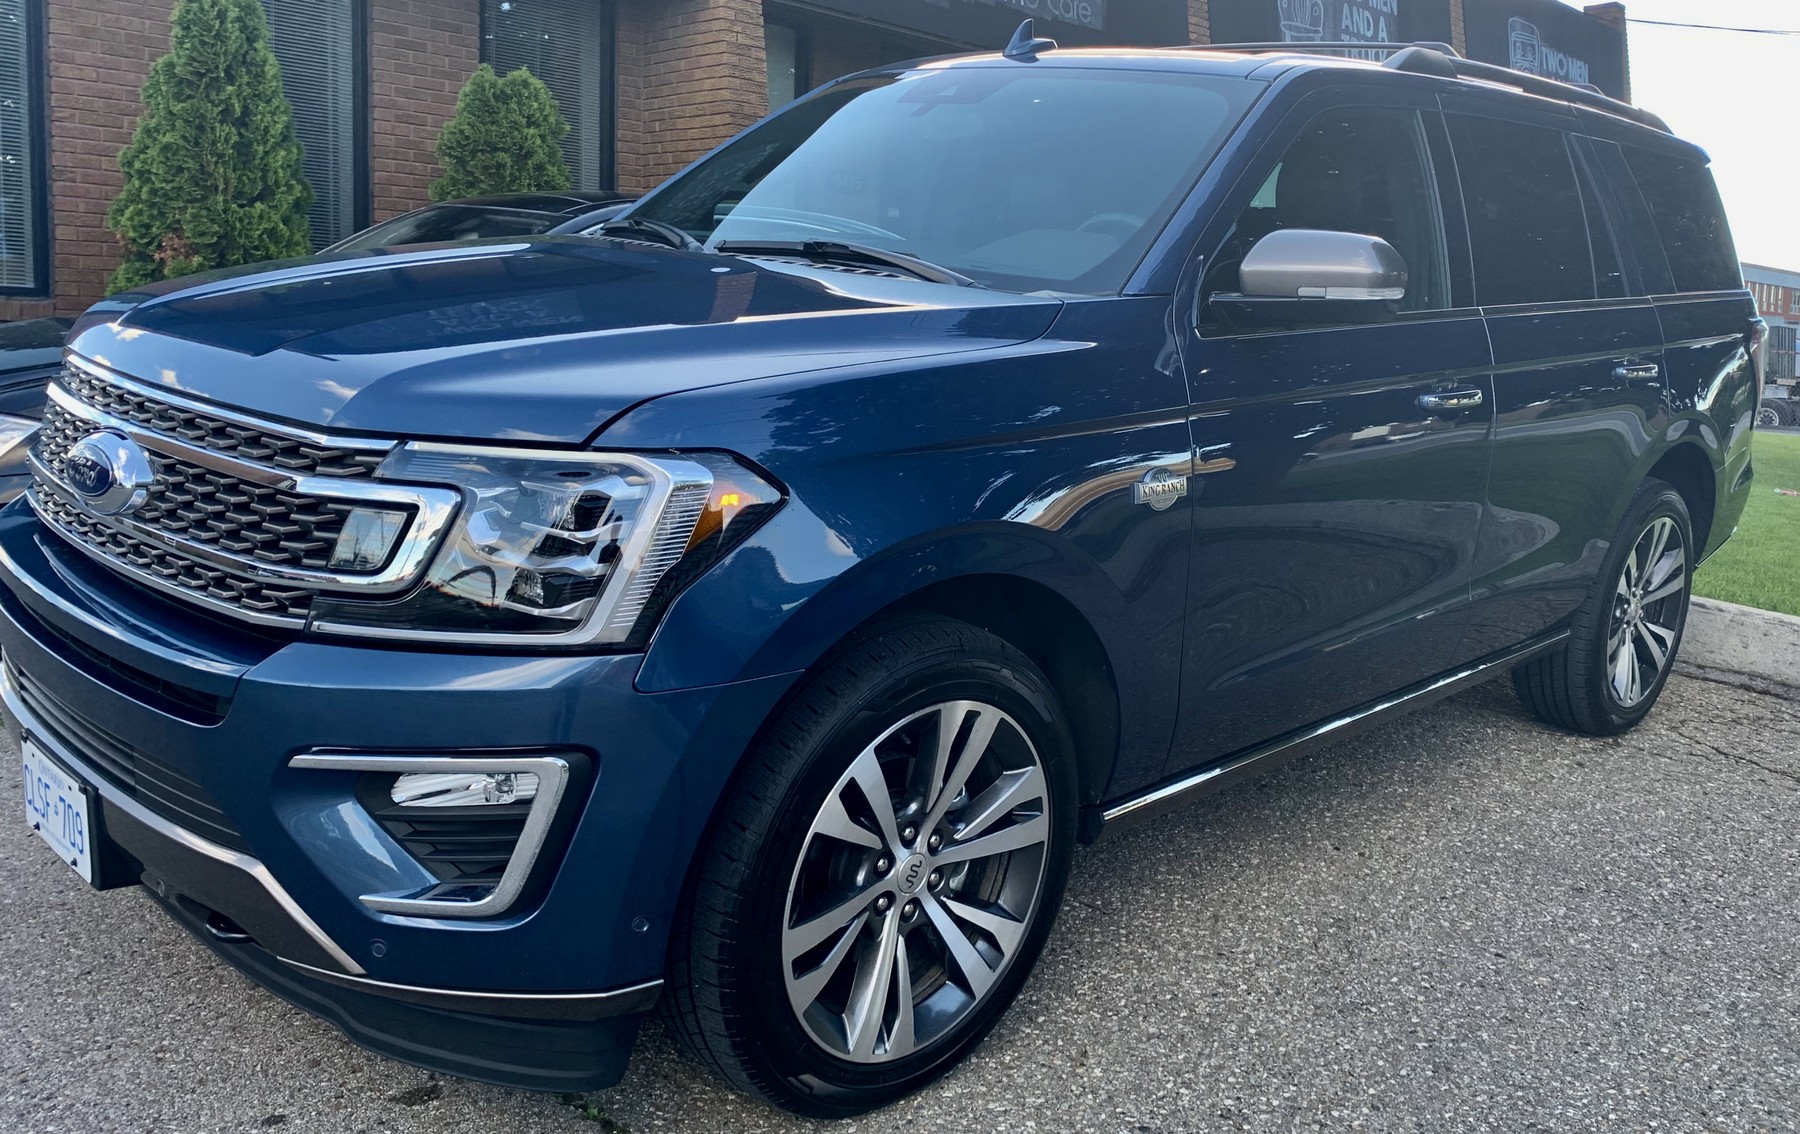 Expedition King Ranch Ford 2020 | R.G. Beltzner